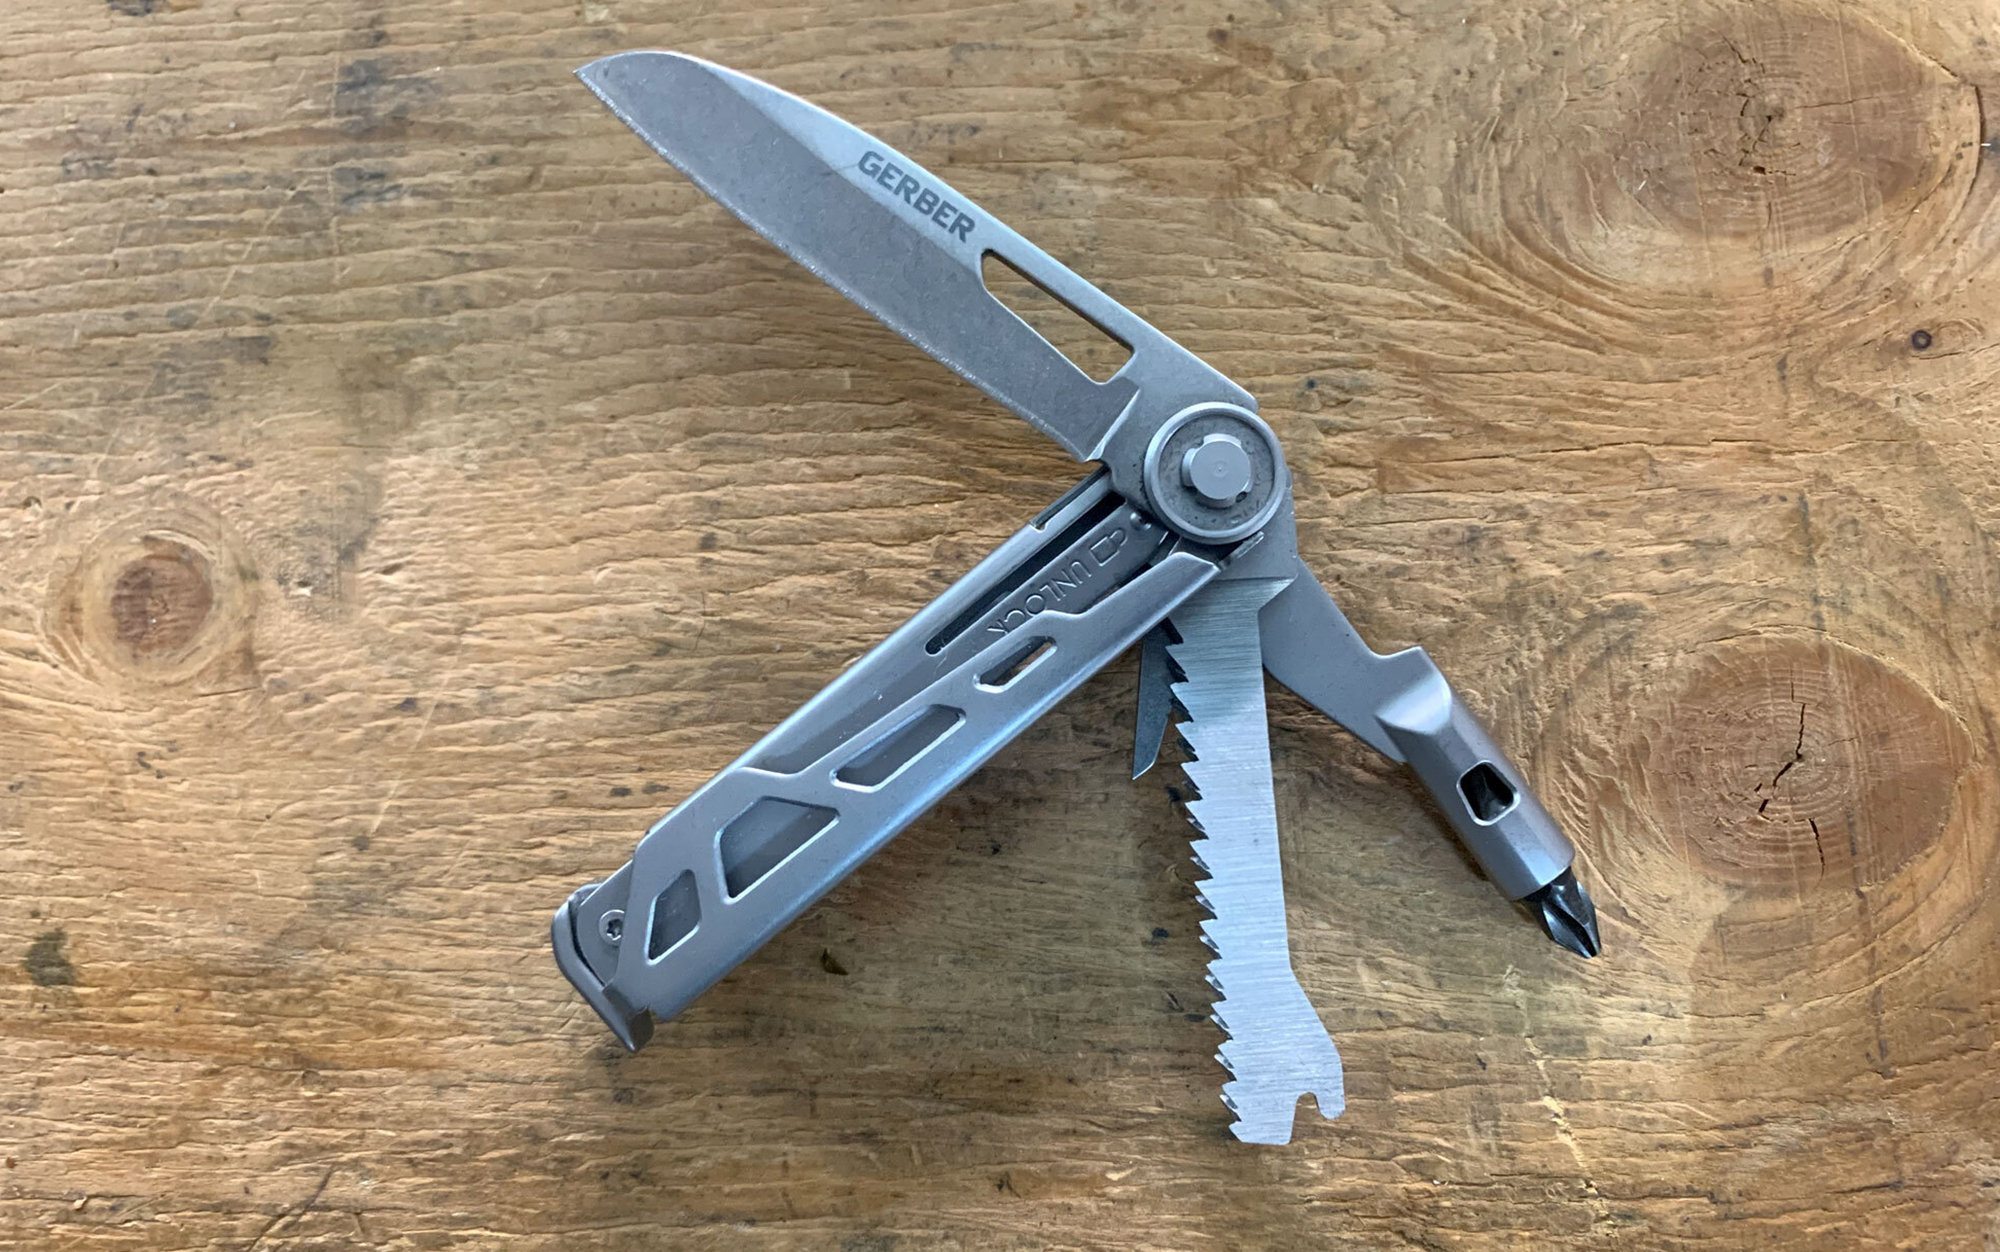 The Gerber Armbar Trade features a drop-point knife blade, ¼-inch driver, double-sided flat/Phillips bit, saw, awl/punch tool, small serrated sawing section, ¼-inch wrench, and bottle opener/pry/hammer tool.